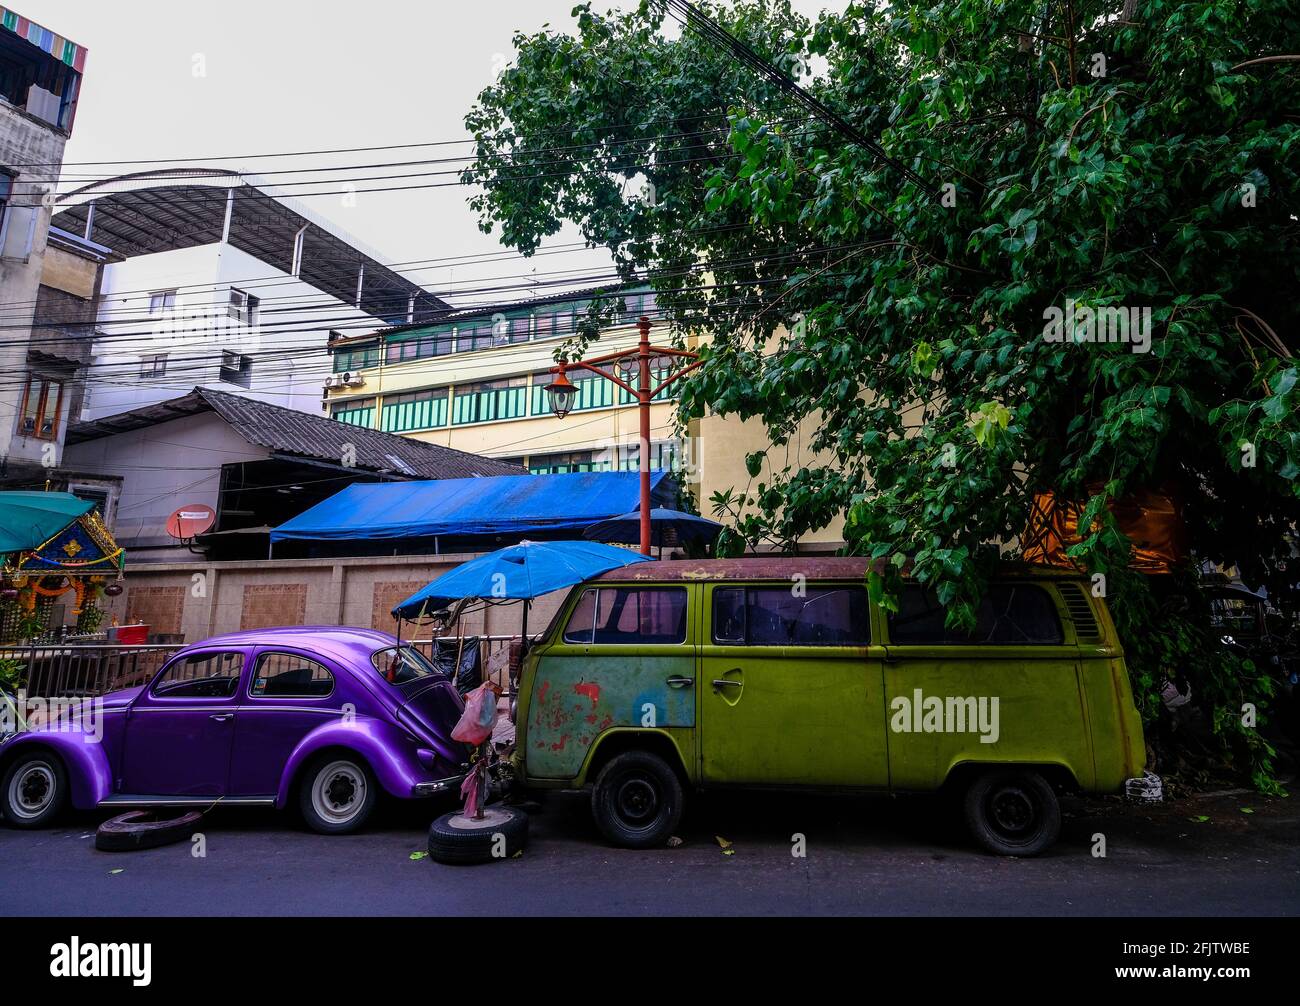 An old purple VW Beetle cars and a green VW Dormobile are parked in a street in the Chinatown area of Bangkok, Thailand Stock Photo